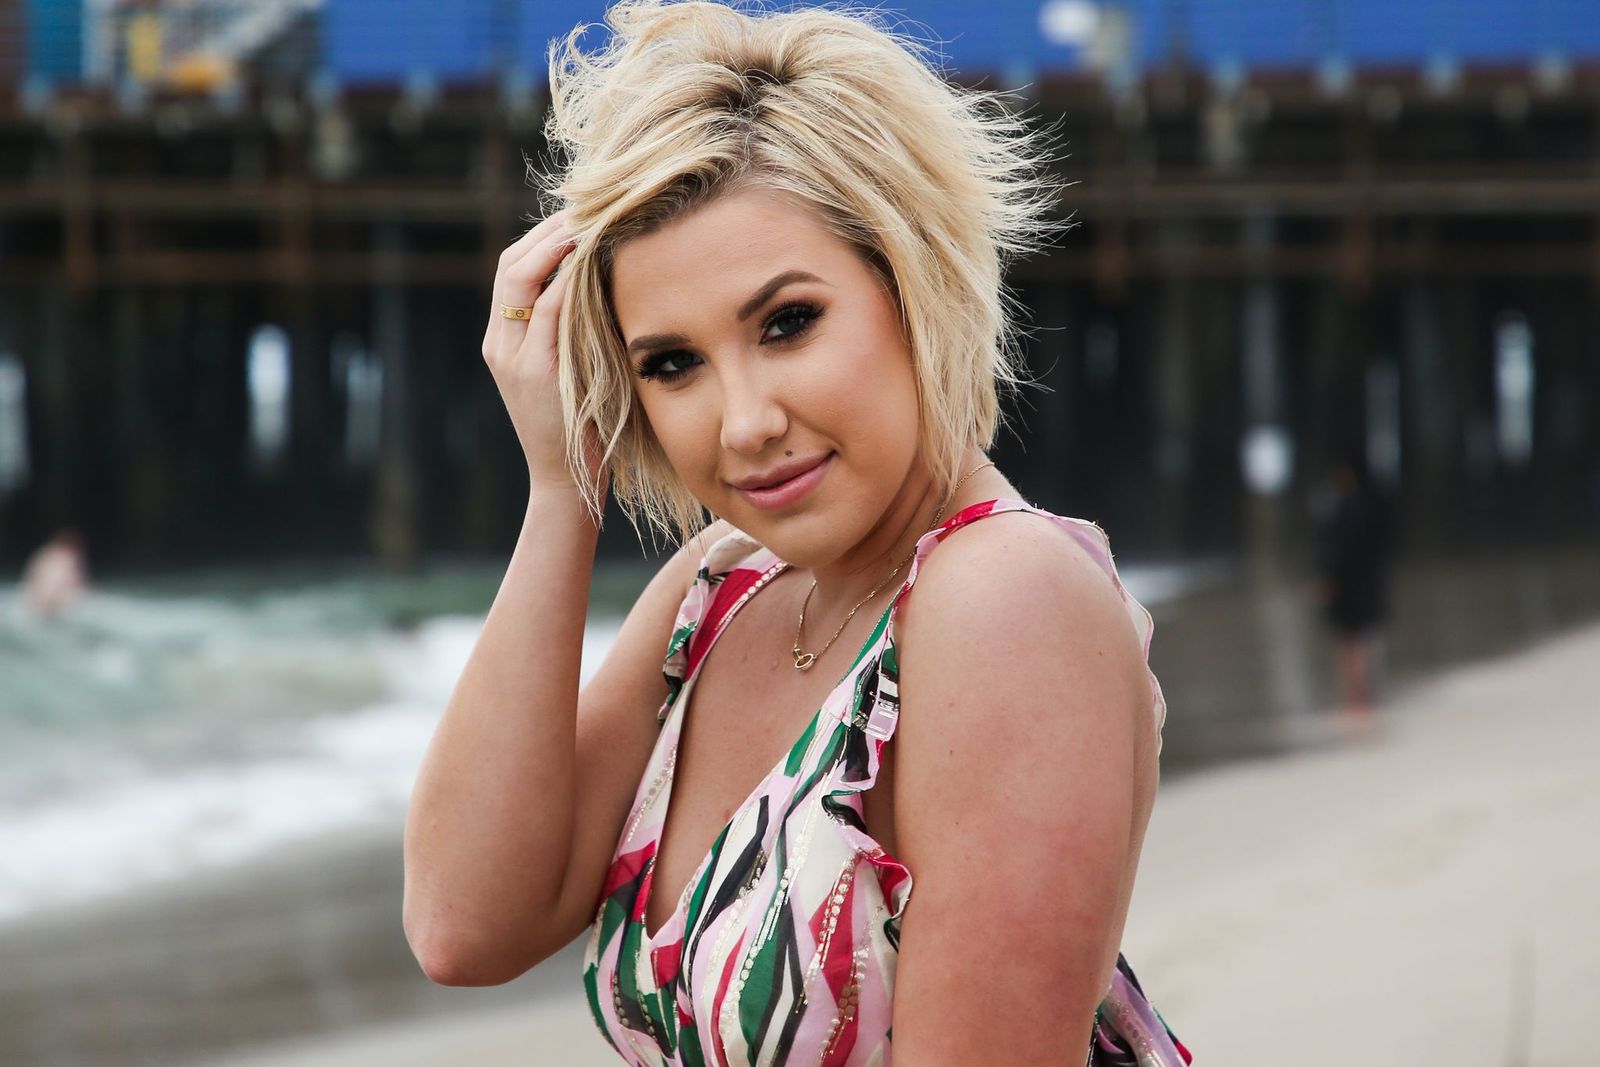 Savannah Chrisley celebrates her engagement to Nic Kerdiles on March 27, 2019, in Santa Monica, California | Photo: Getty Images